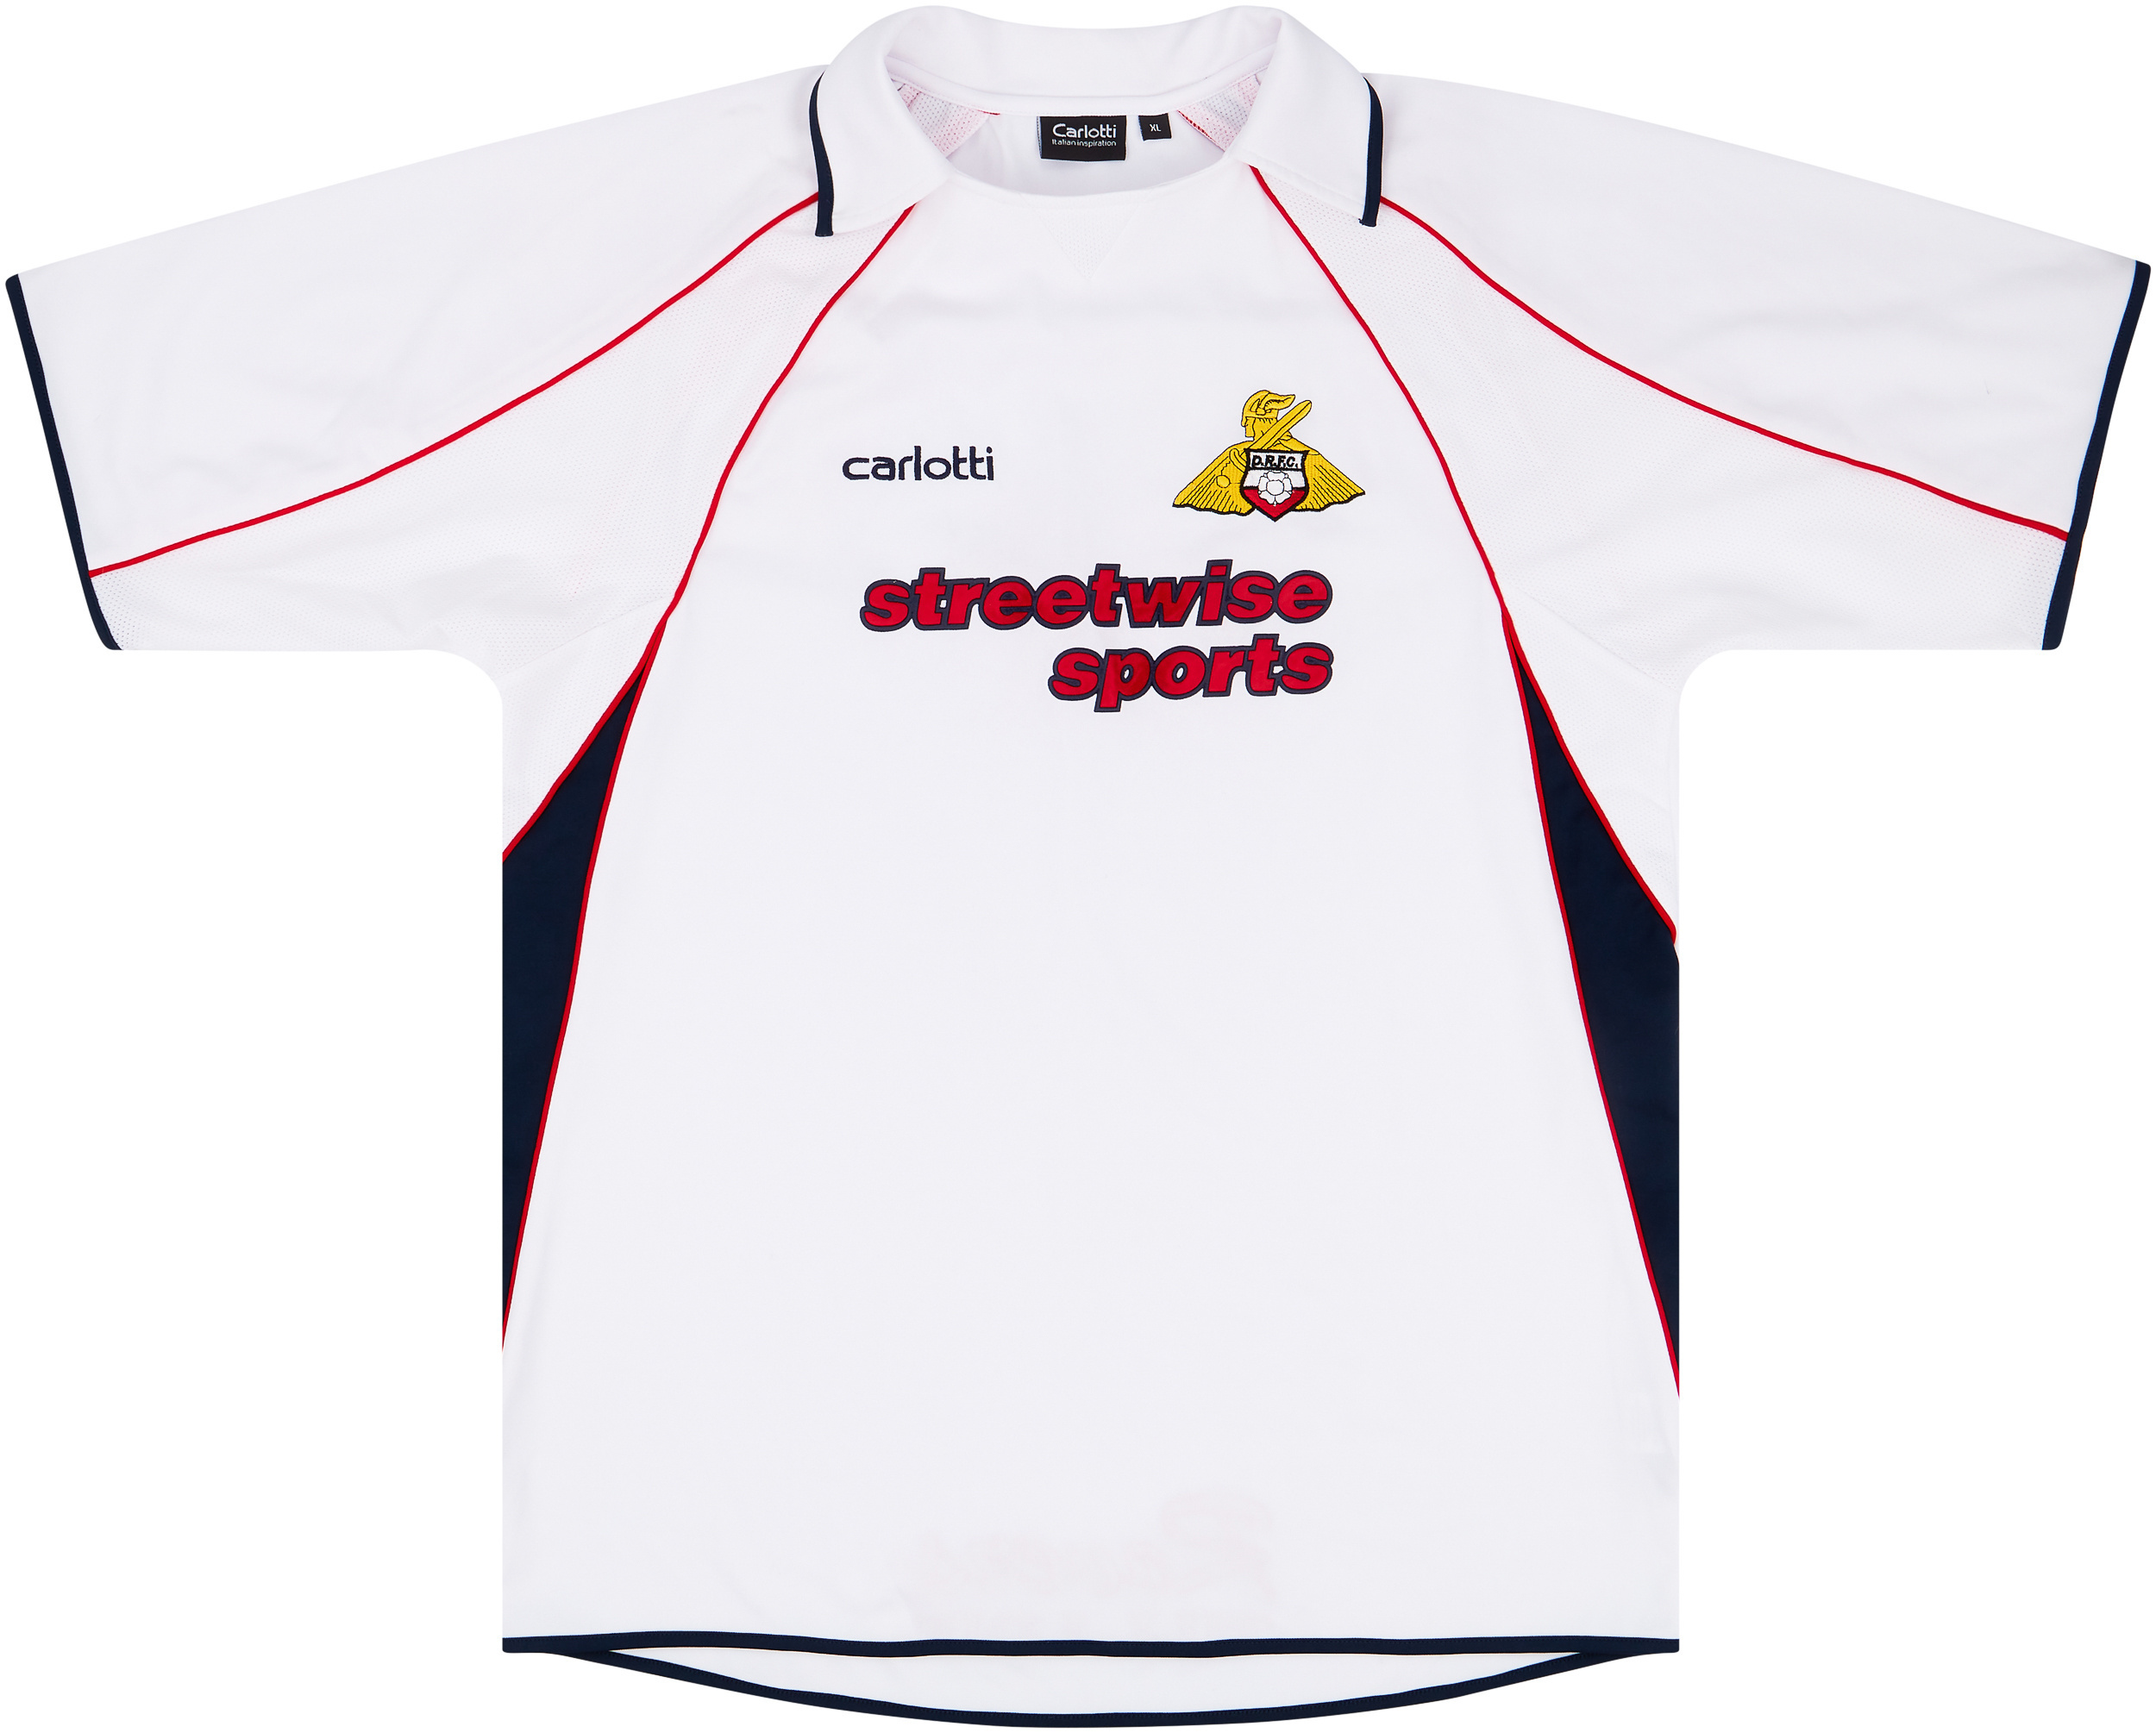 2004-05 Doncaster Rovers Away Shirt - 7/10 - ()